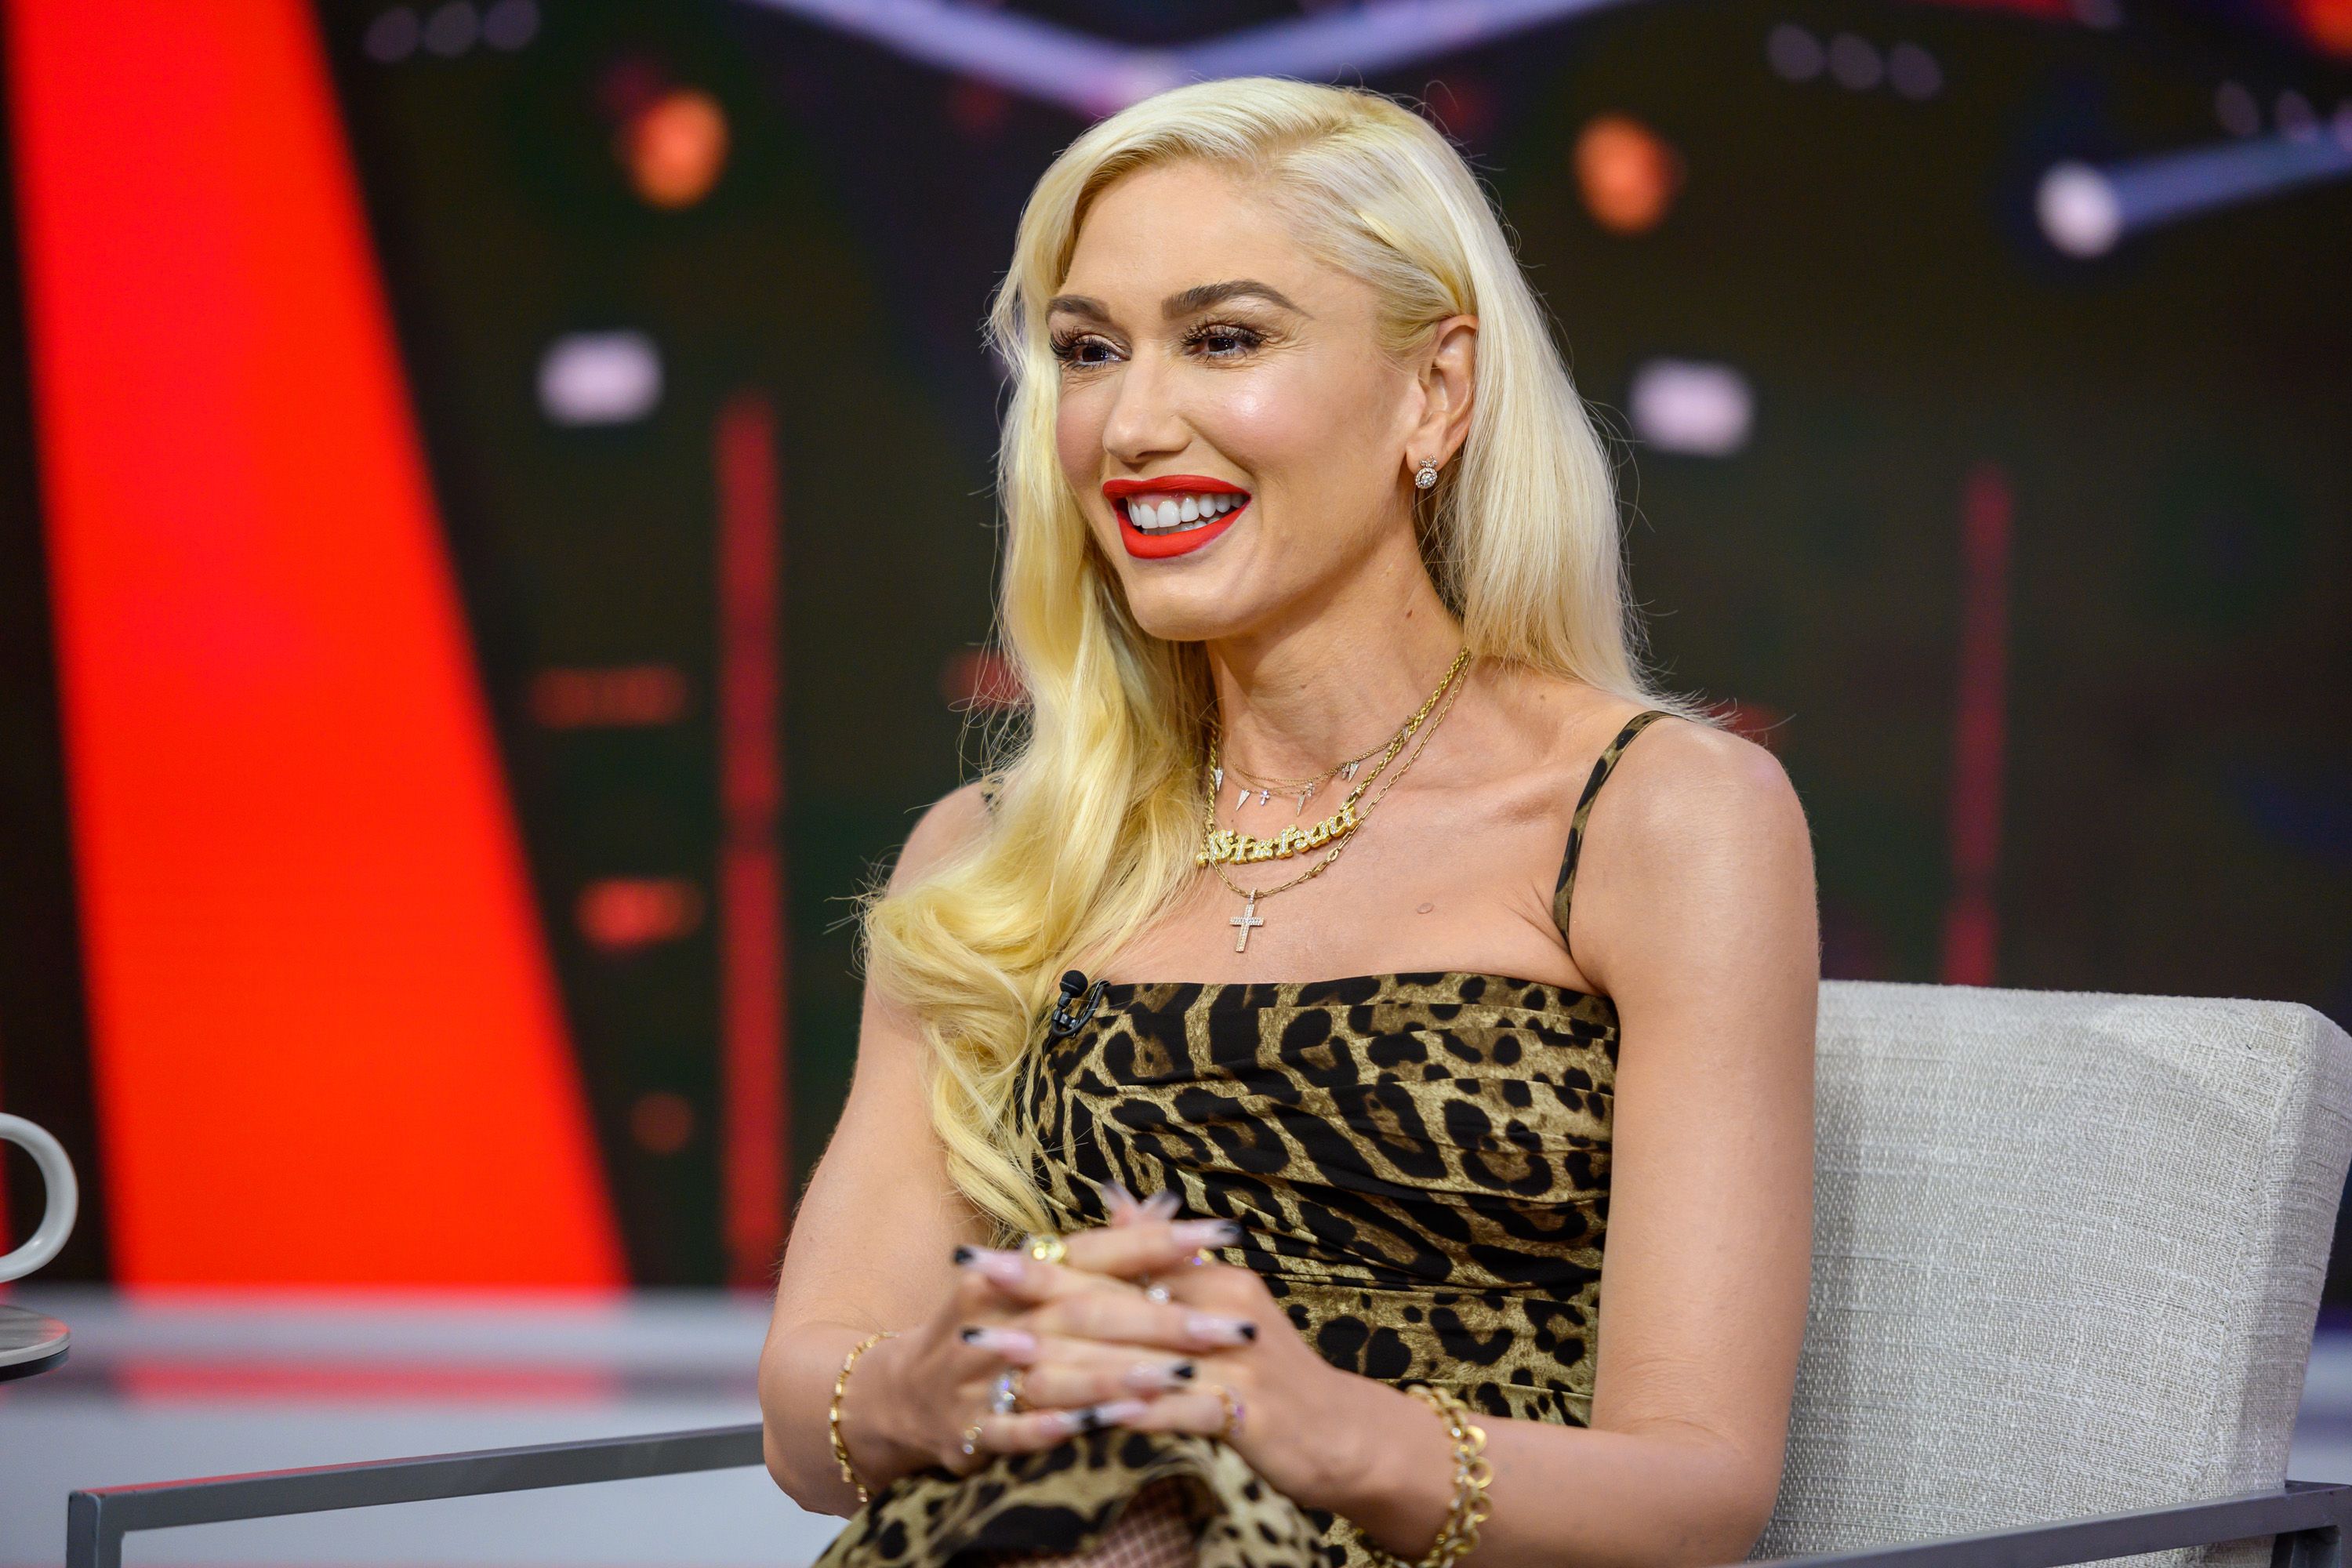 Gwen Stefani on the set of the "Today" show on September 23, 2019. | Photo: Getty Images